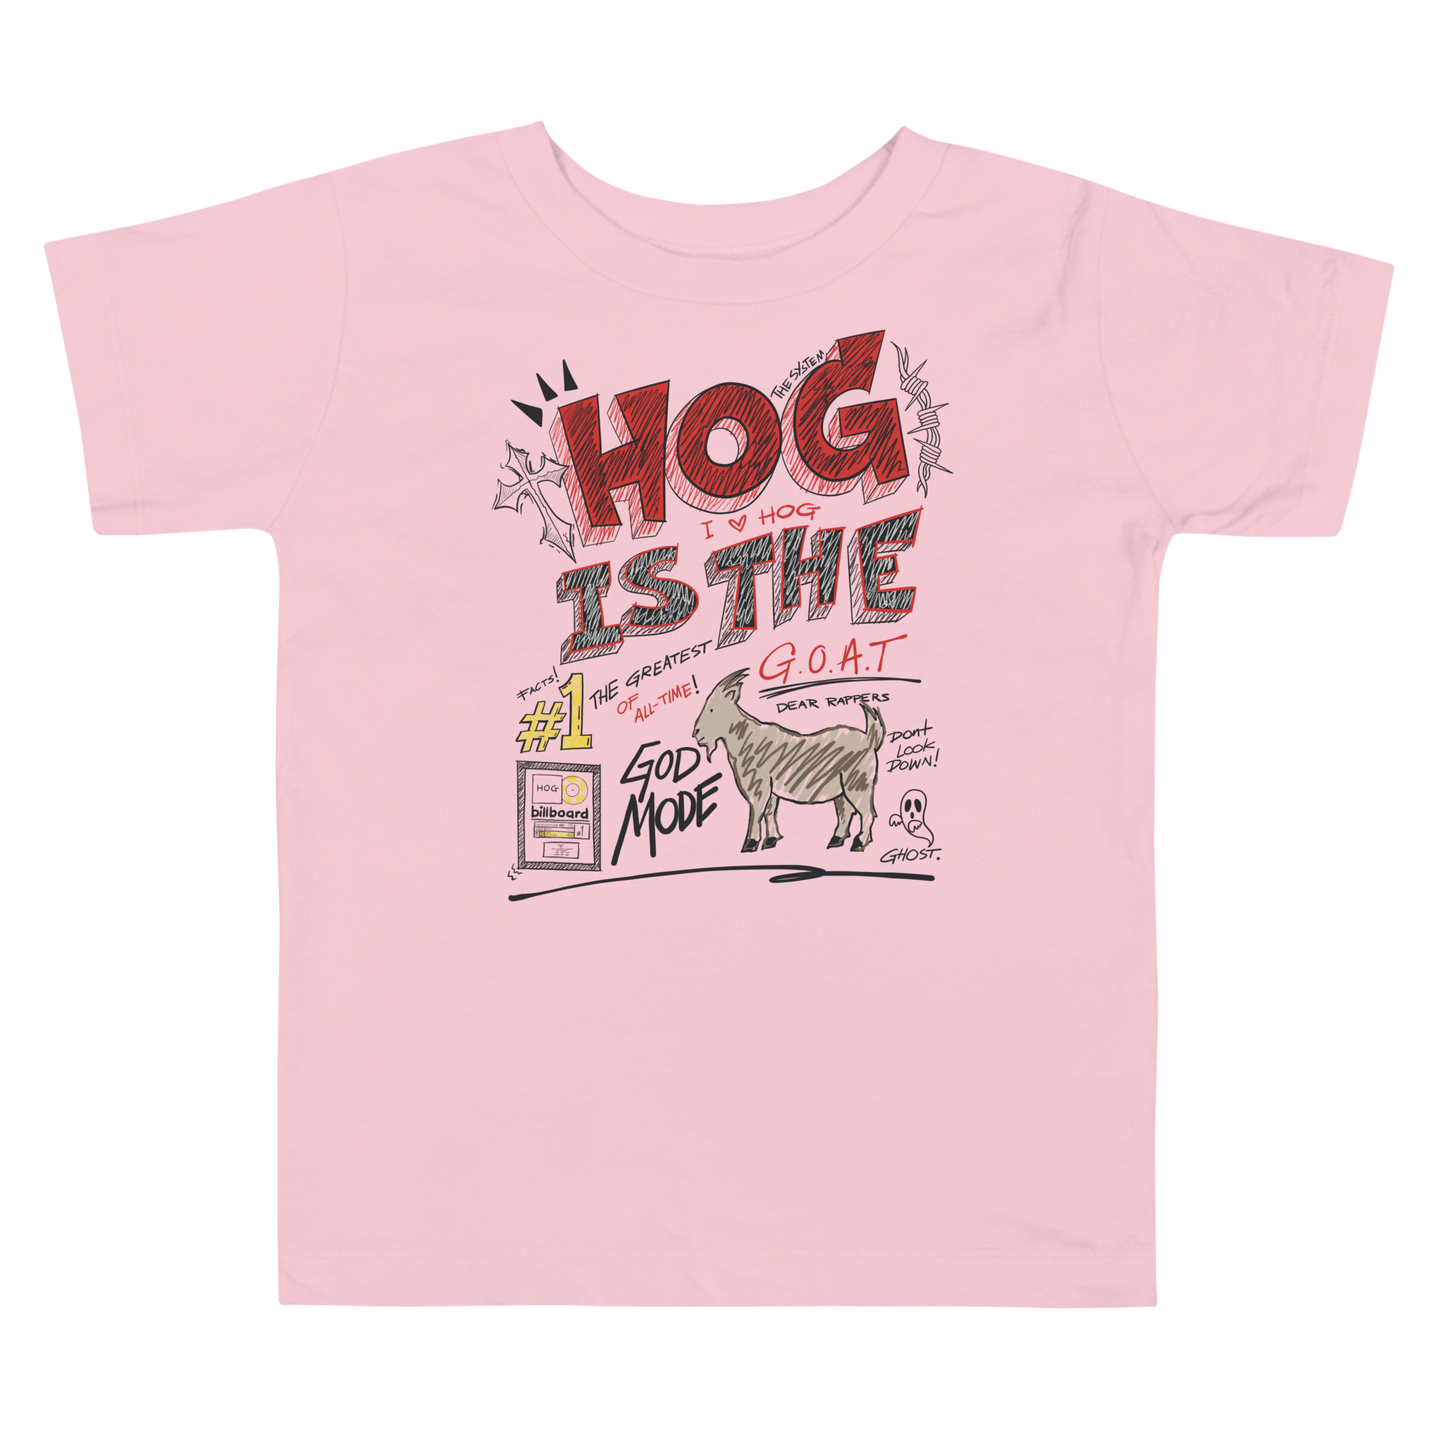 Toddler "HOG is the G.O.A.T" T-shirt